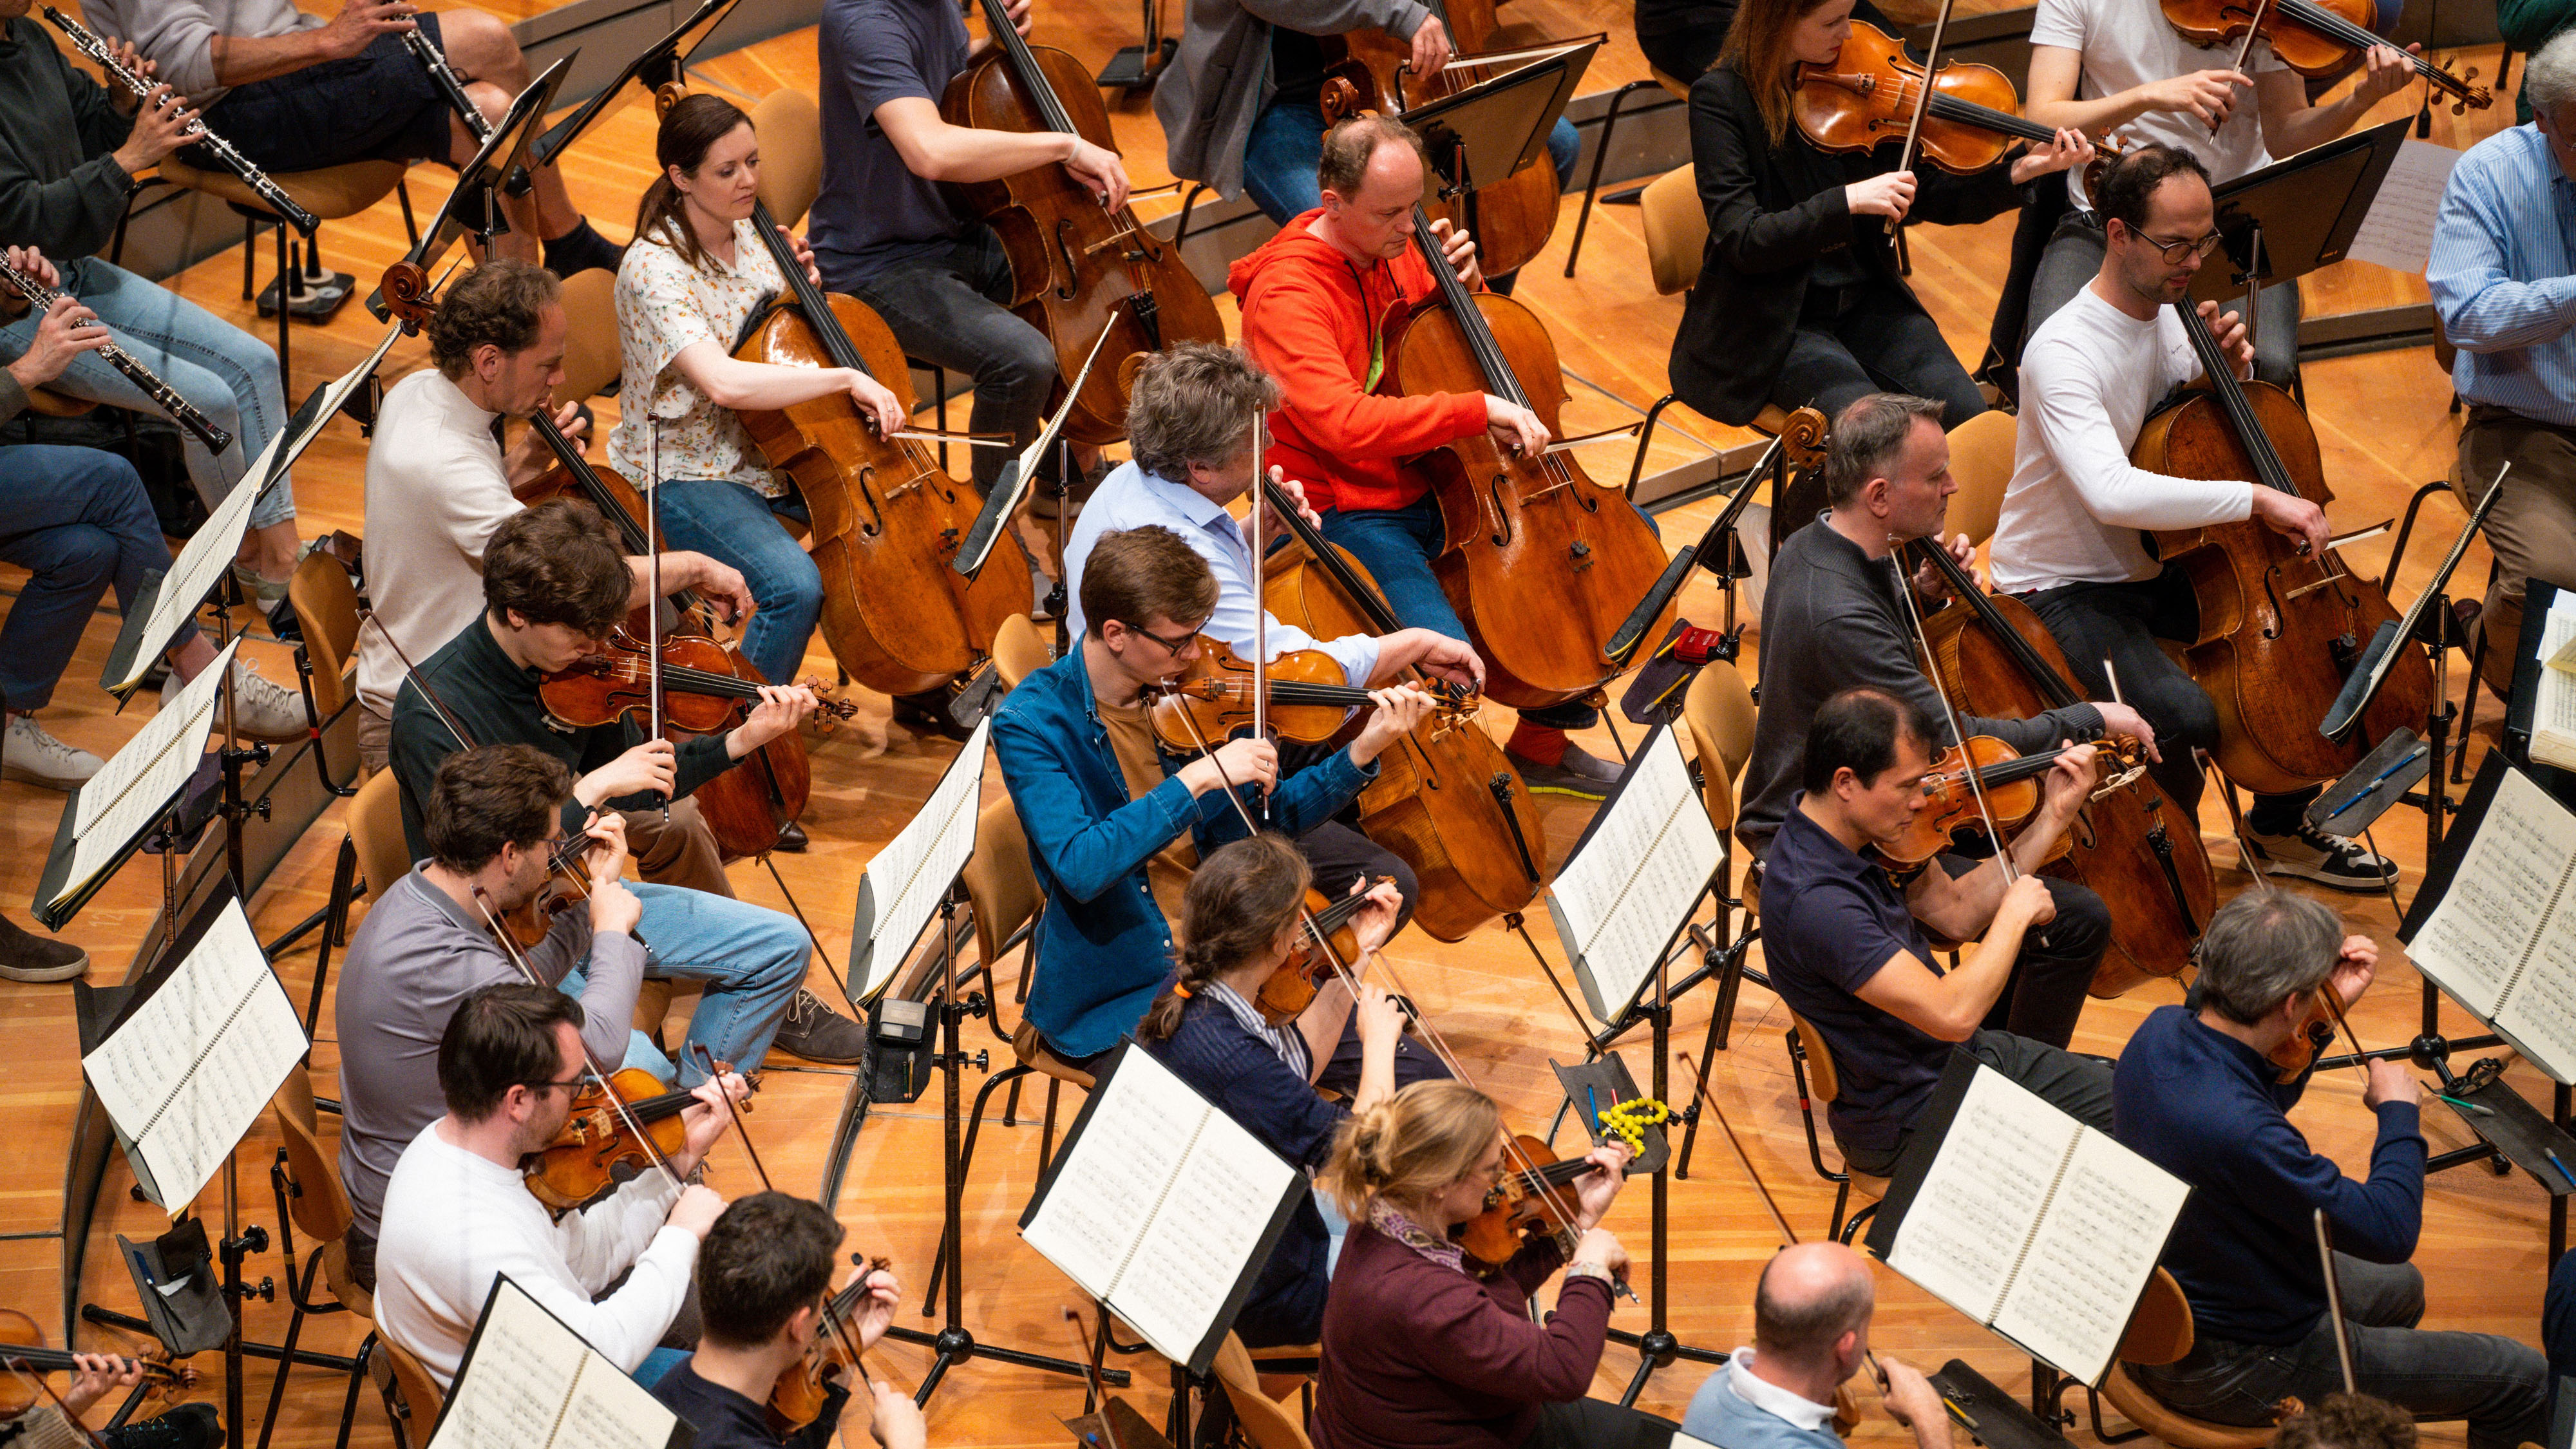 Group of musicians in the orchestra playing music at a rehearsal